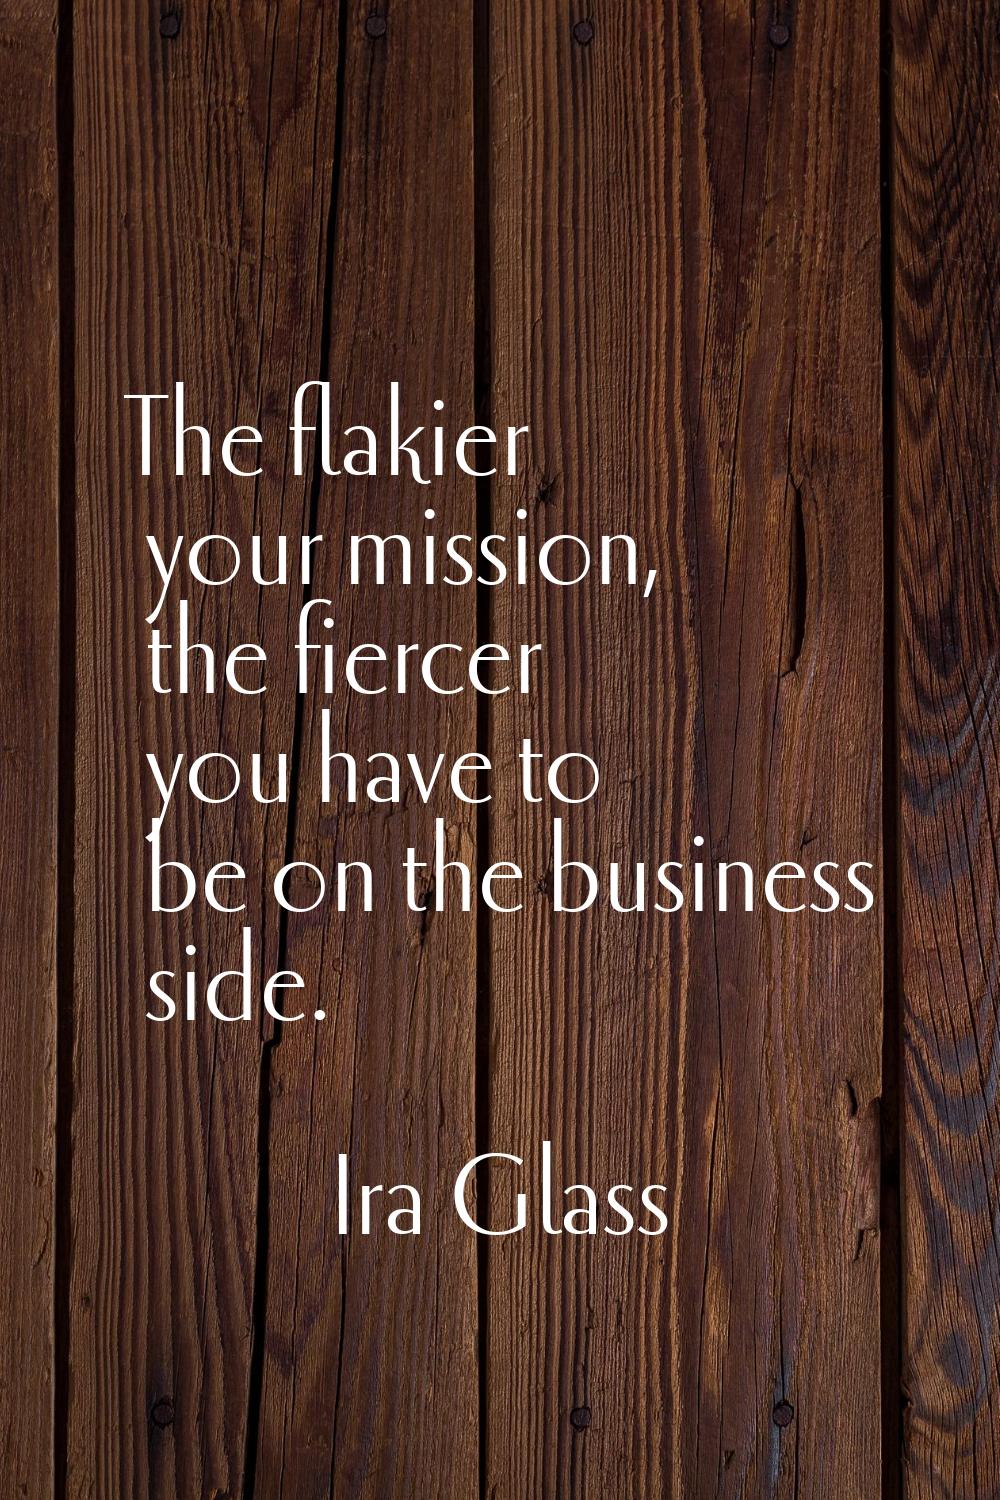 The flakier your mission, the fiercer you have to be on the business side.